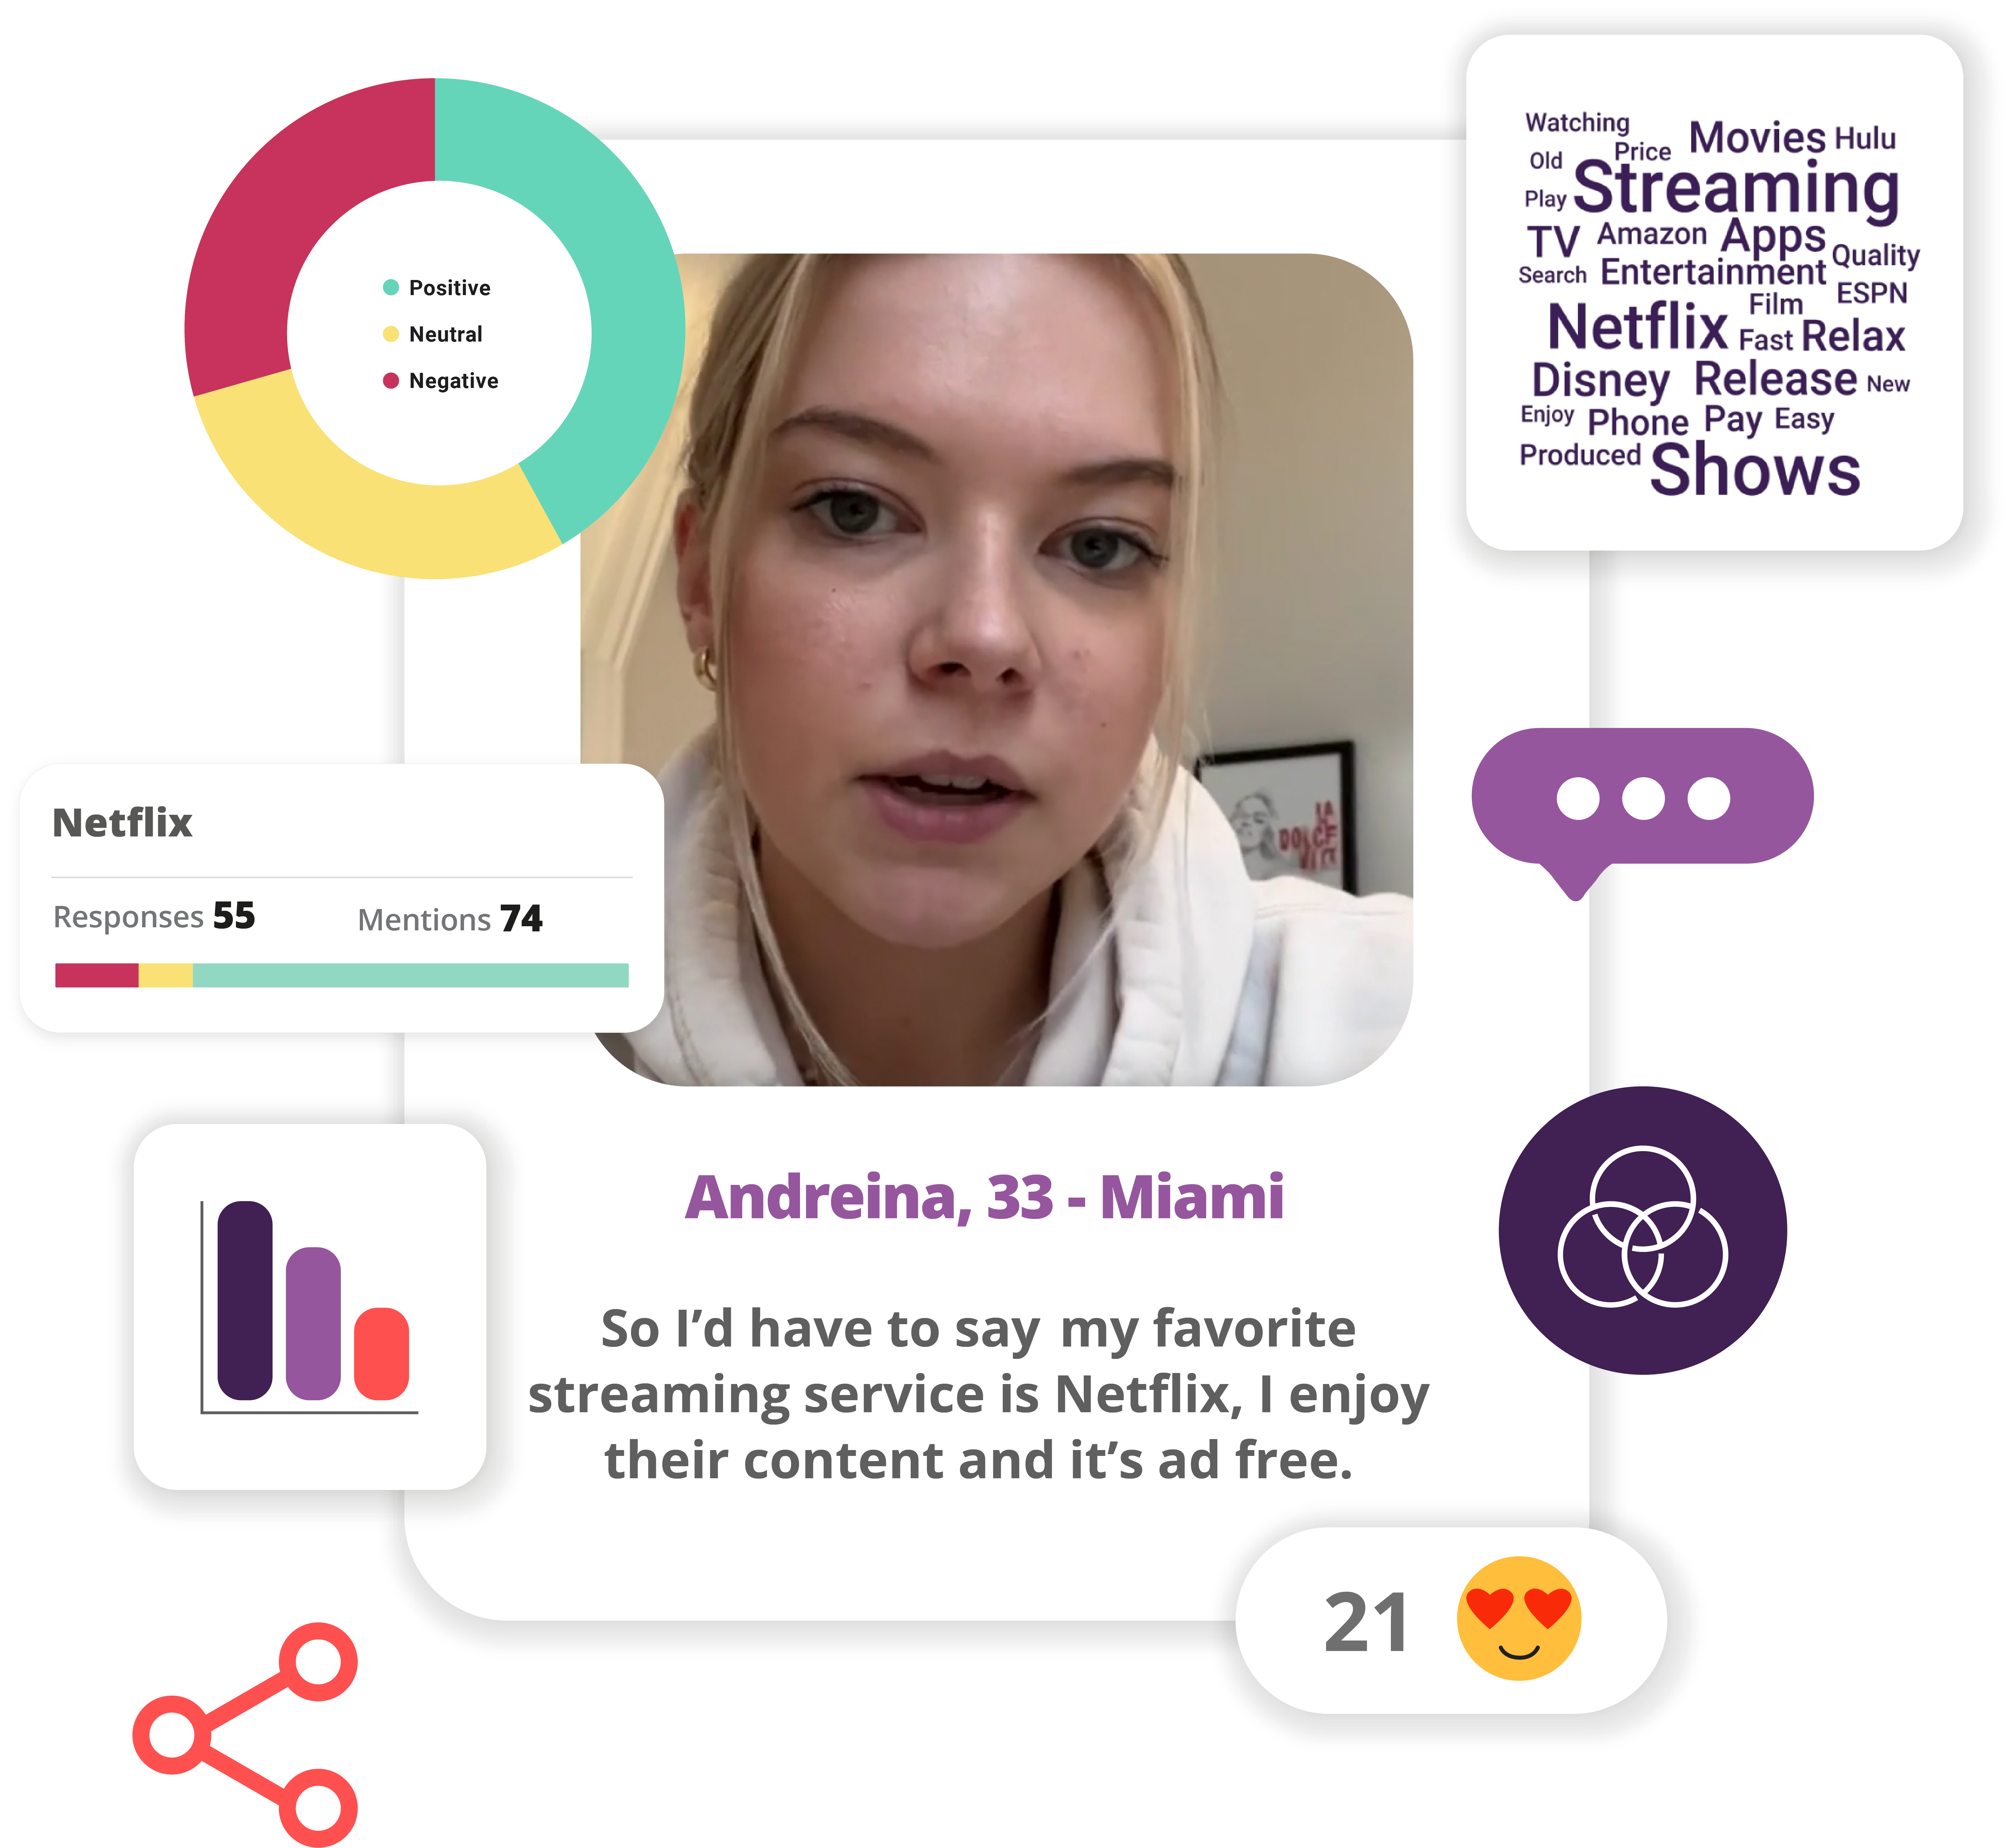 A social media app that incorporates a woman's face and various social media icons, functioning as a qualitative insights platform.